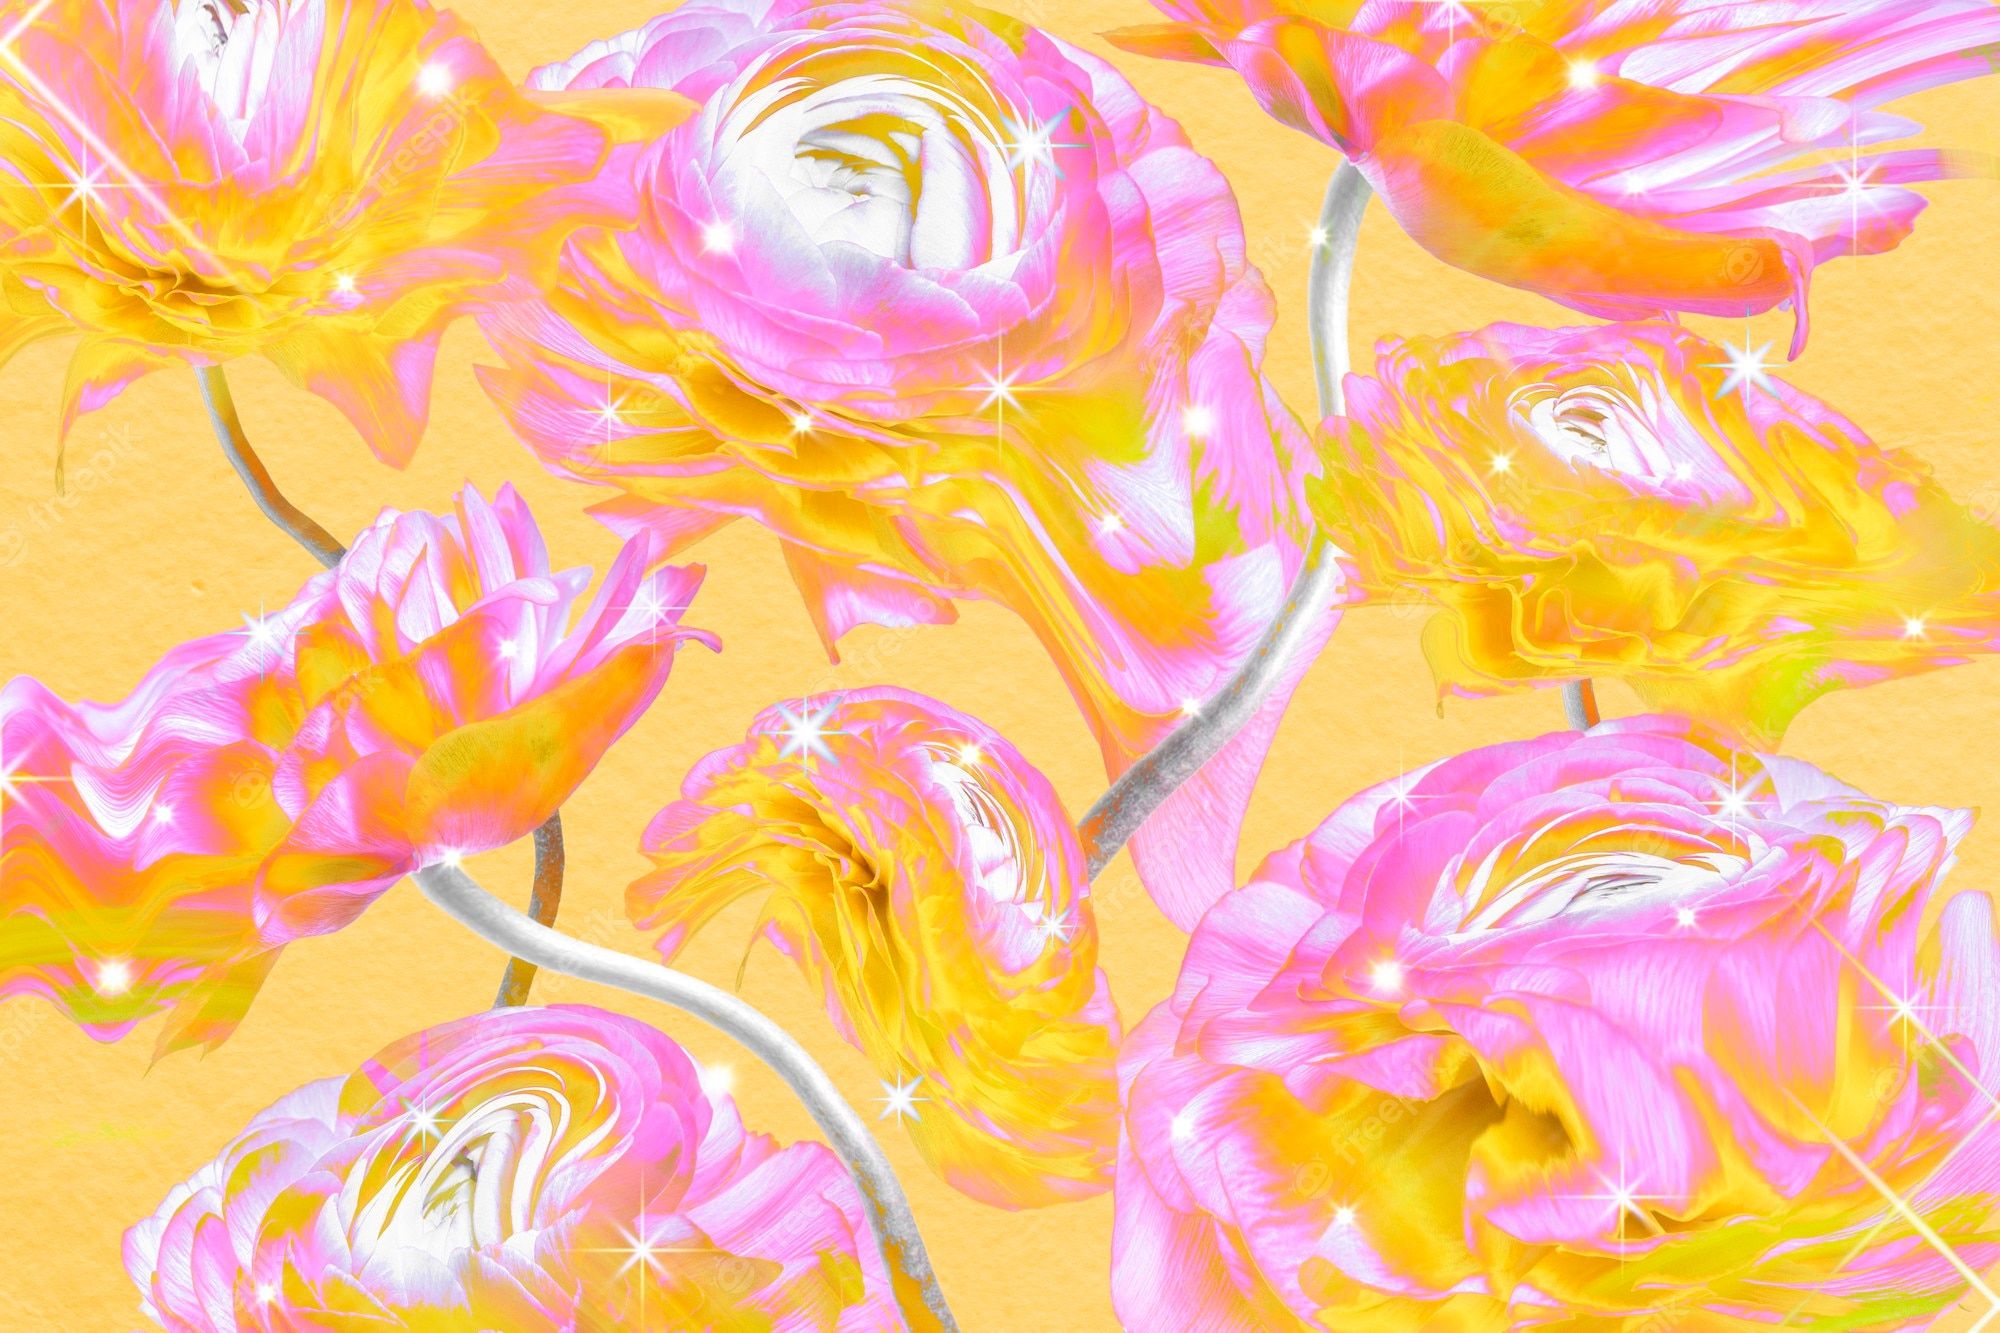 Free Photo. Colorful floral background wallpaper, trippy aesthetic design